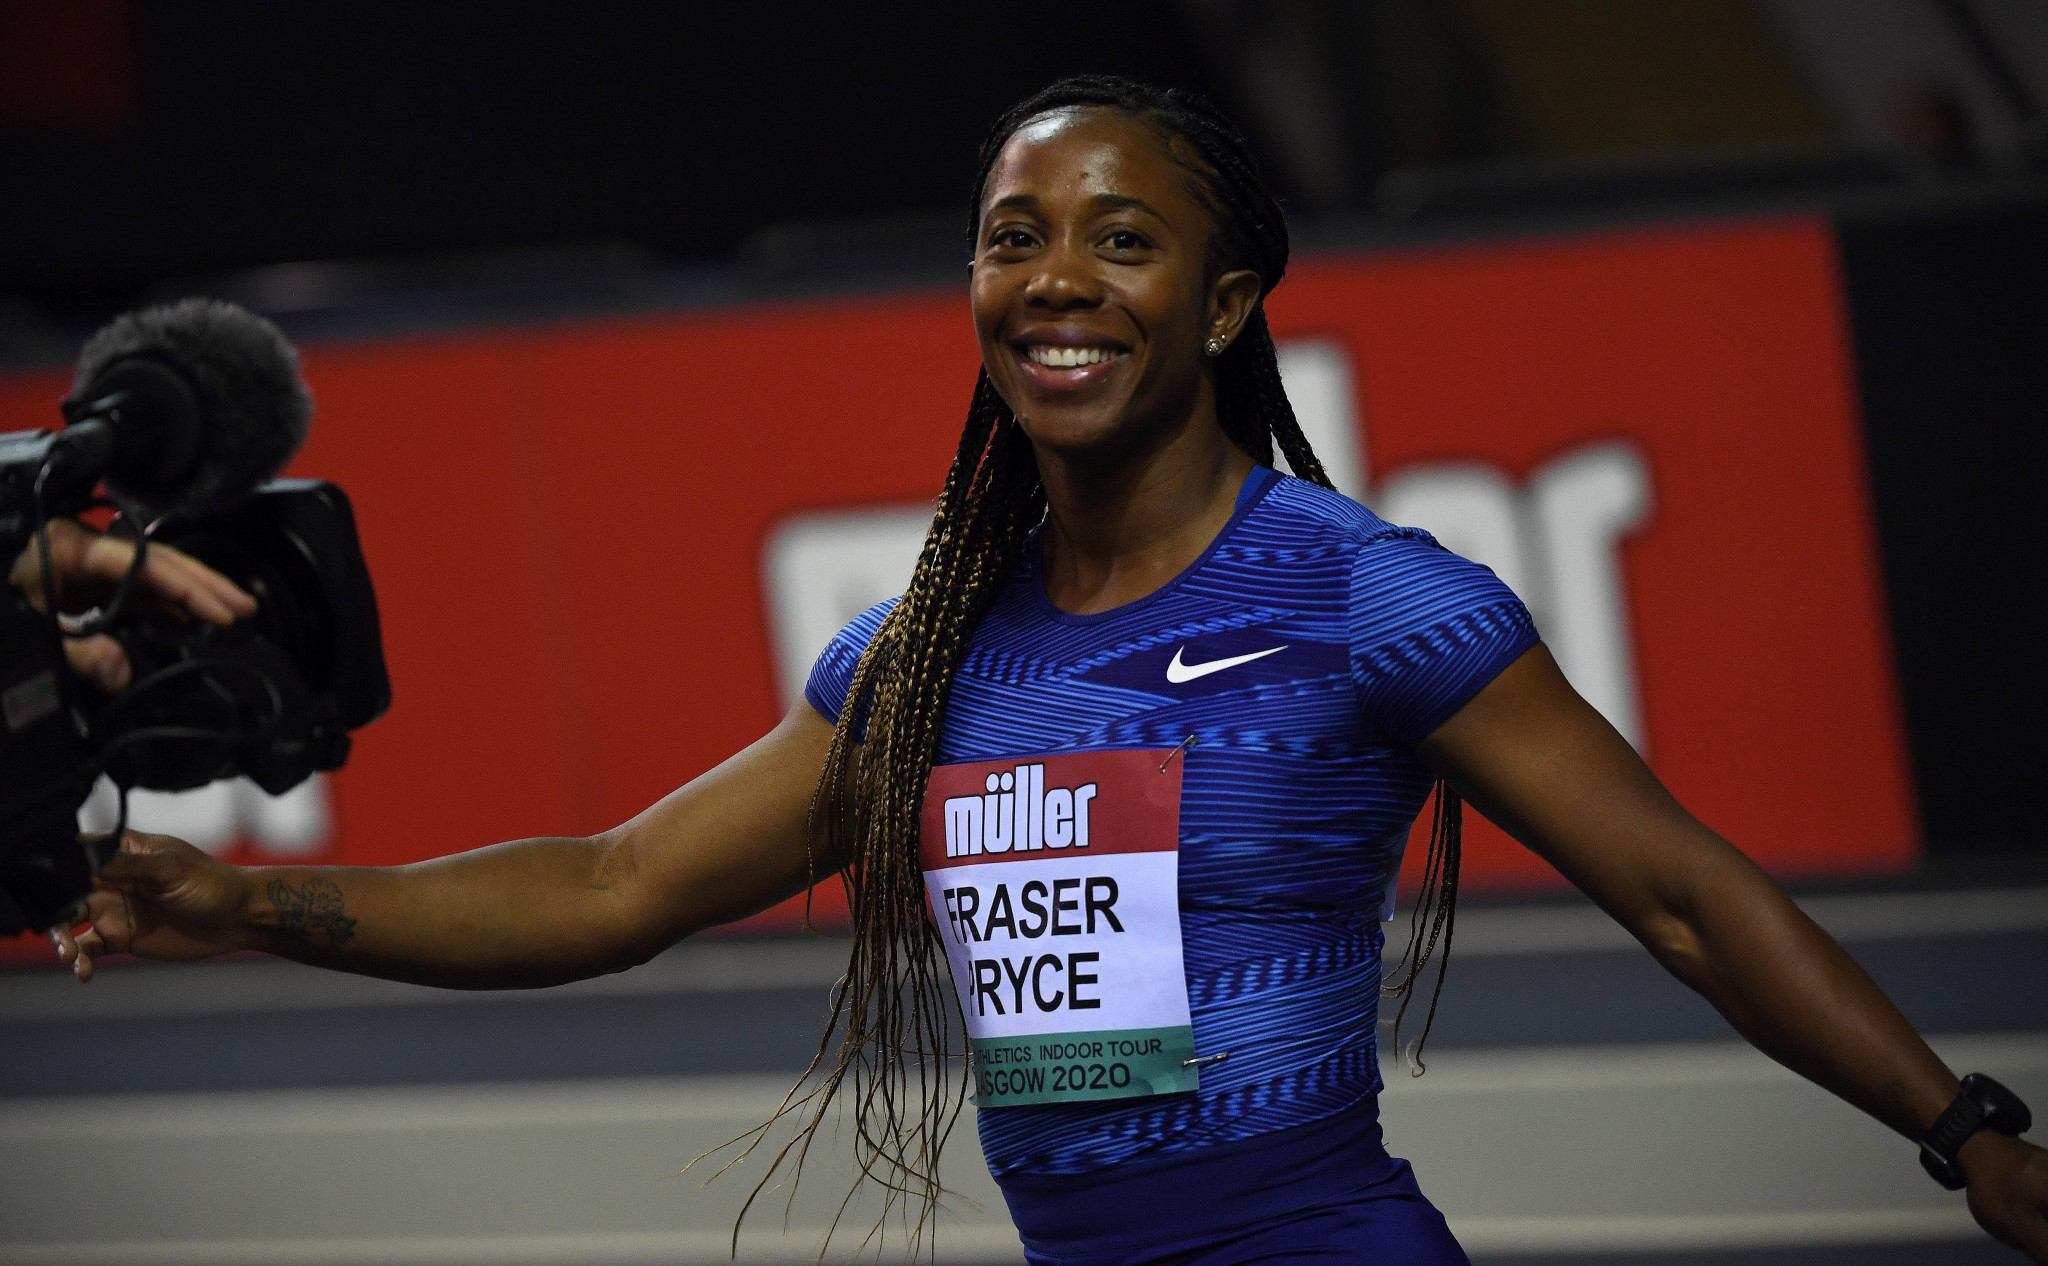 Shelly-Ann Fraser Pryce broke the six-year indoor unbeaten run by Murielle Ahoure ©Getty Images